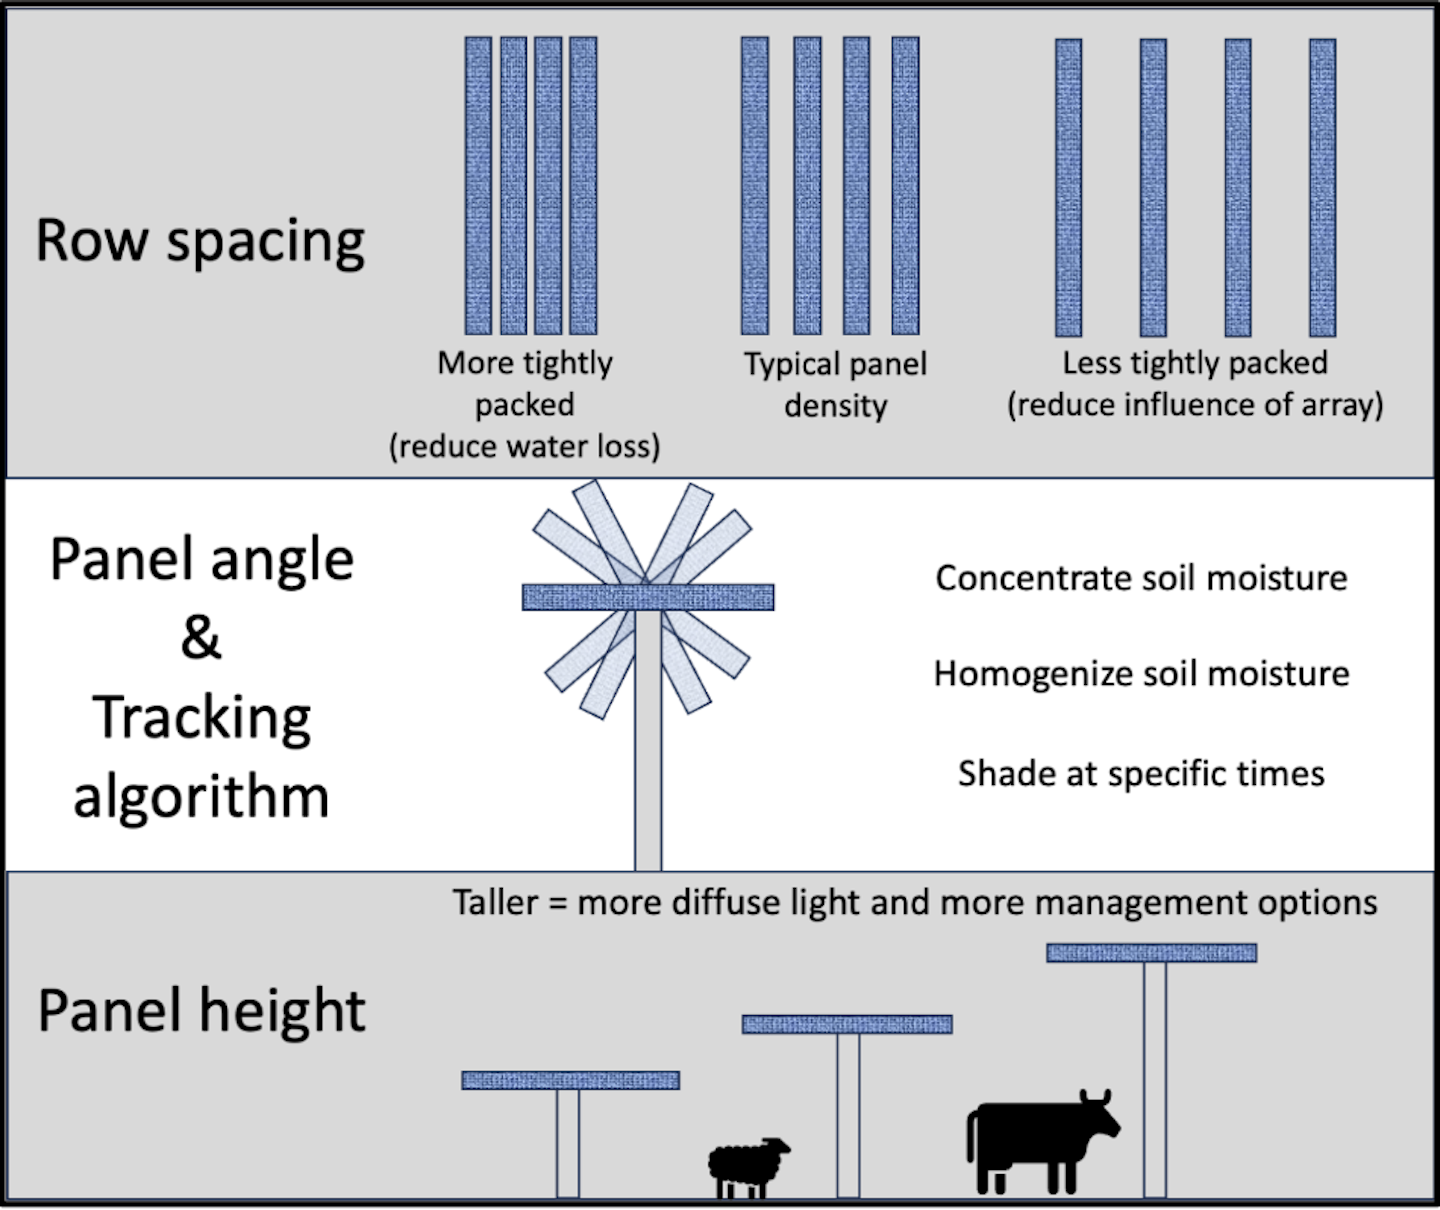 Diagram showing ways to space rows of solar panels, alter their angles or adjust height to achieve various ecological outcomes.